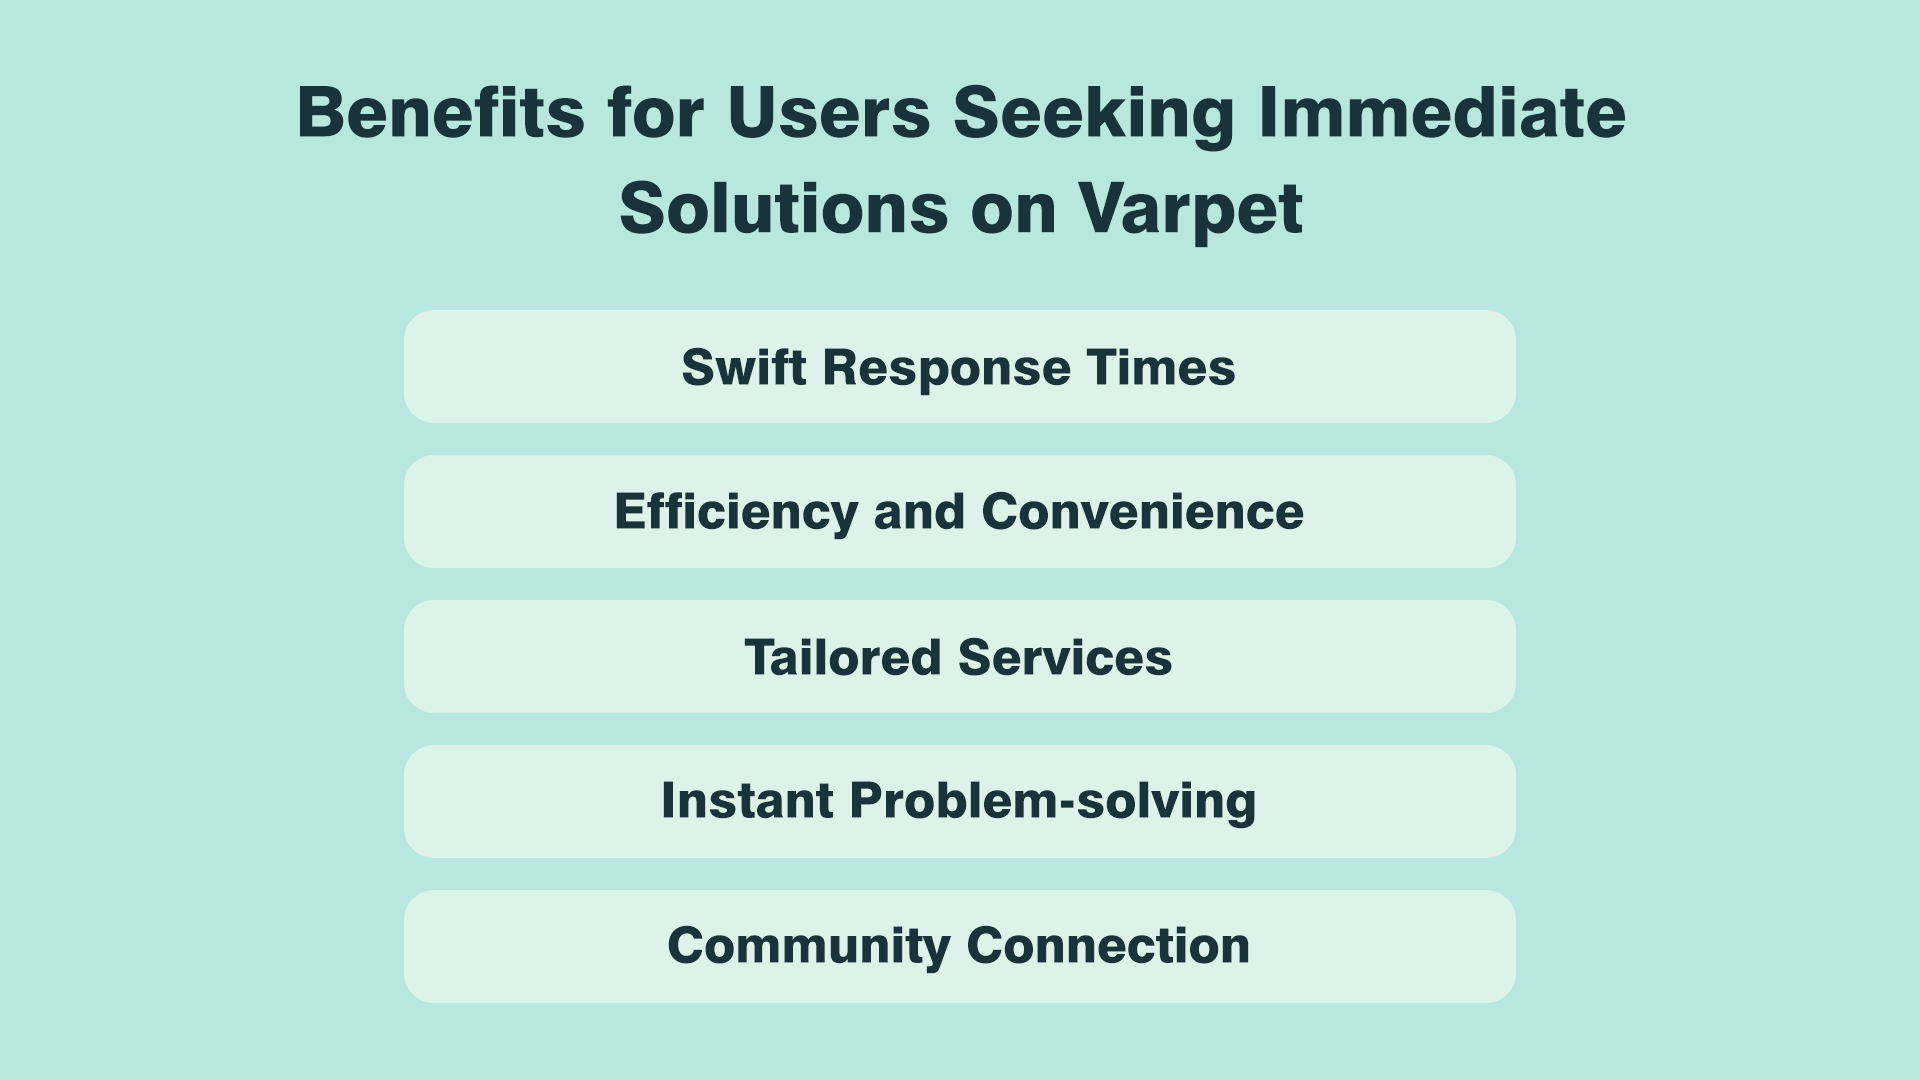 Benefits for Users Seeking Immediate Solutions on Varpet